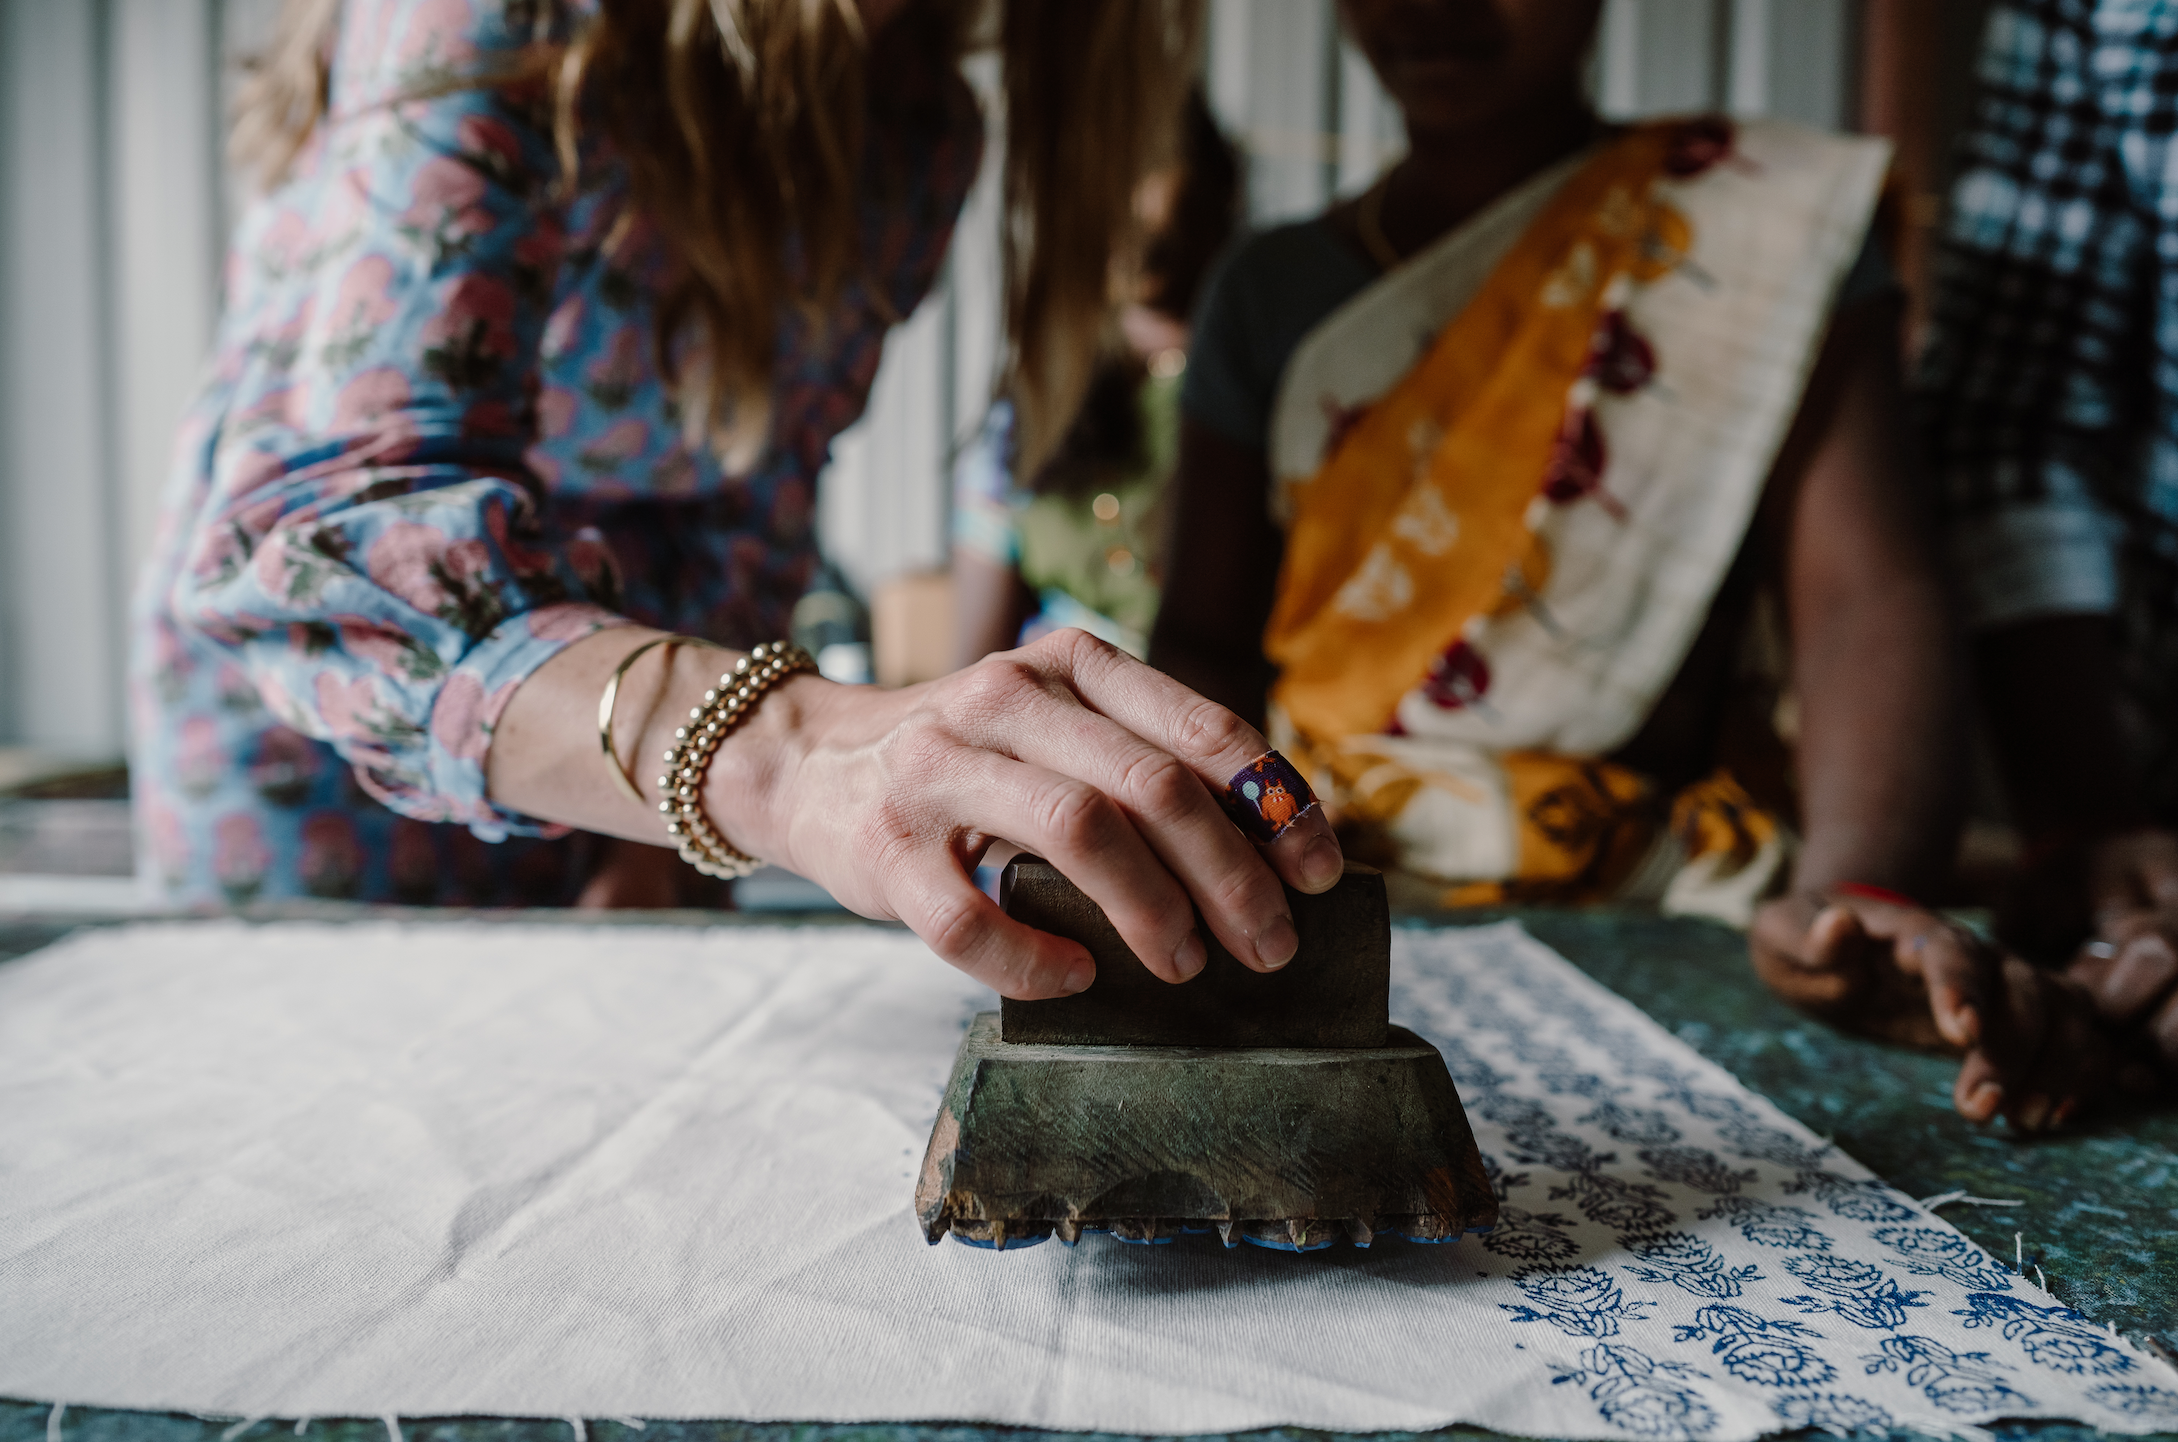 Bring The Beauty Of Block Printing To Your Table* – The Mended Company